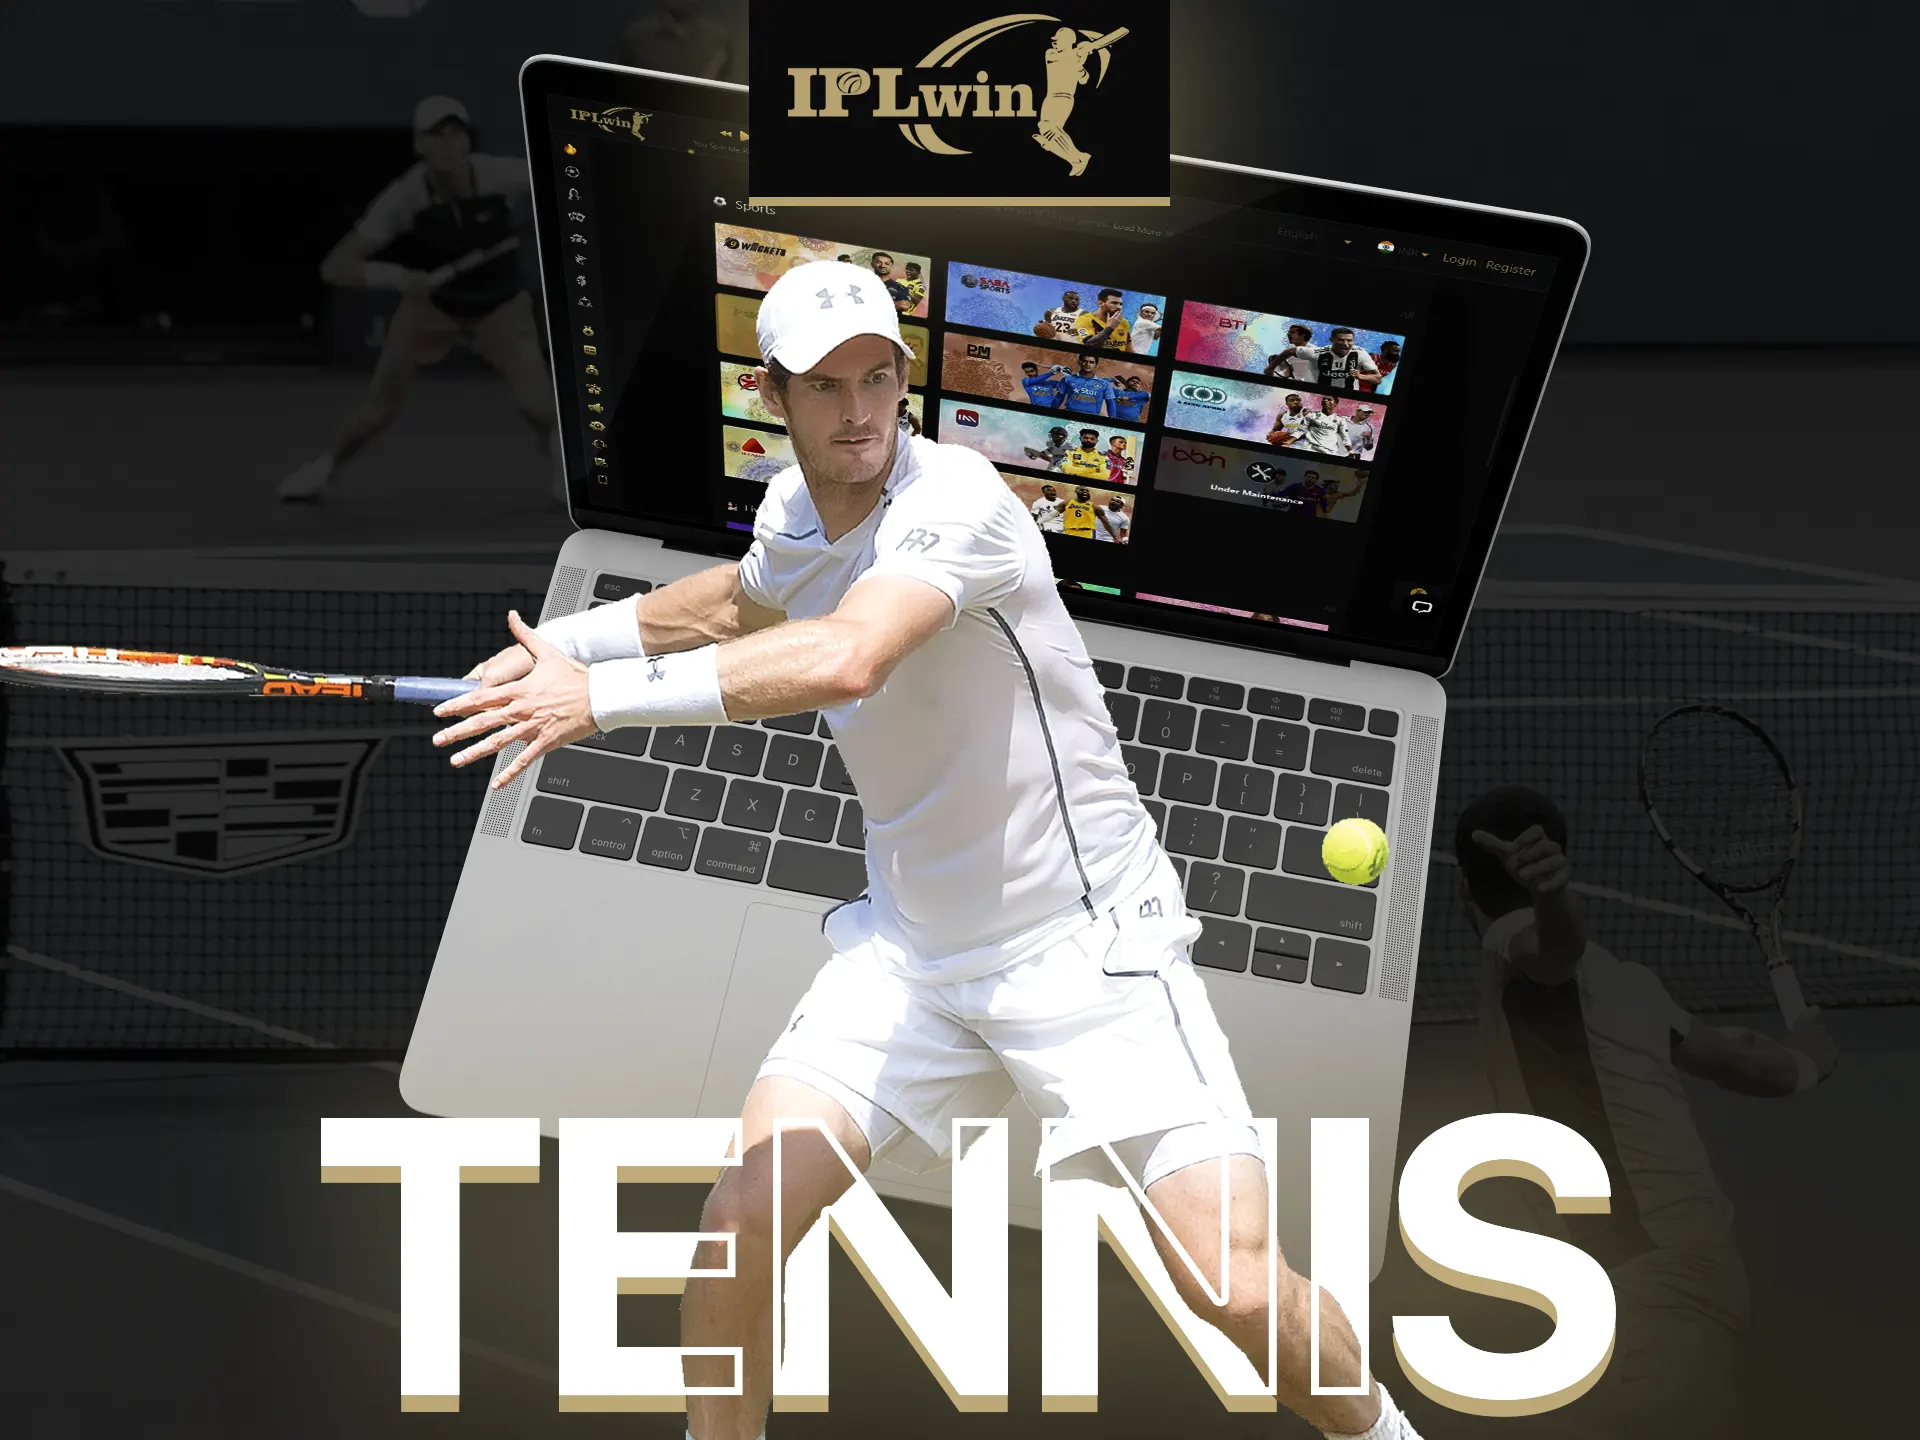 With IPLWIN, bet on tennis tournaments.